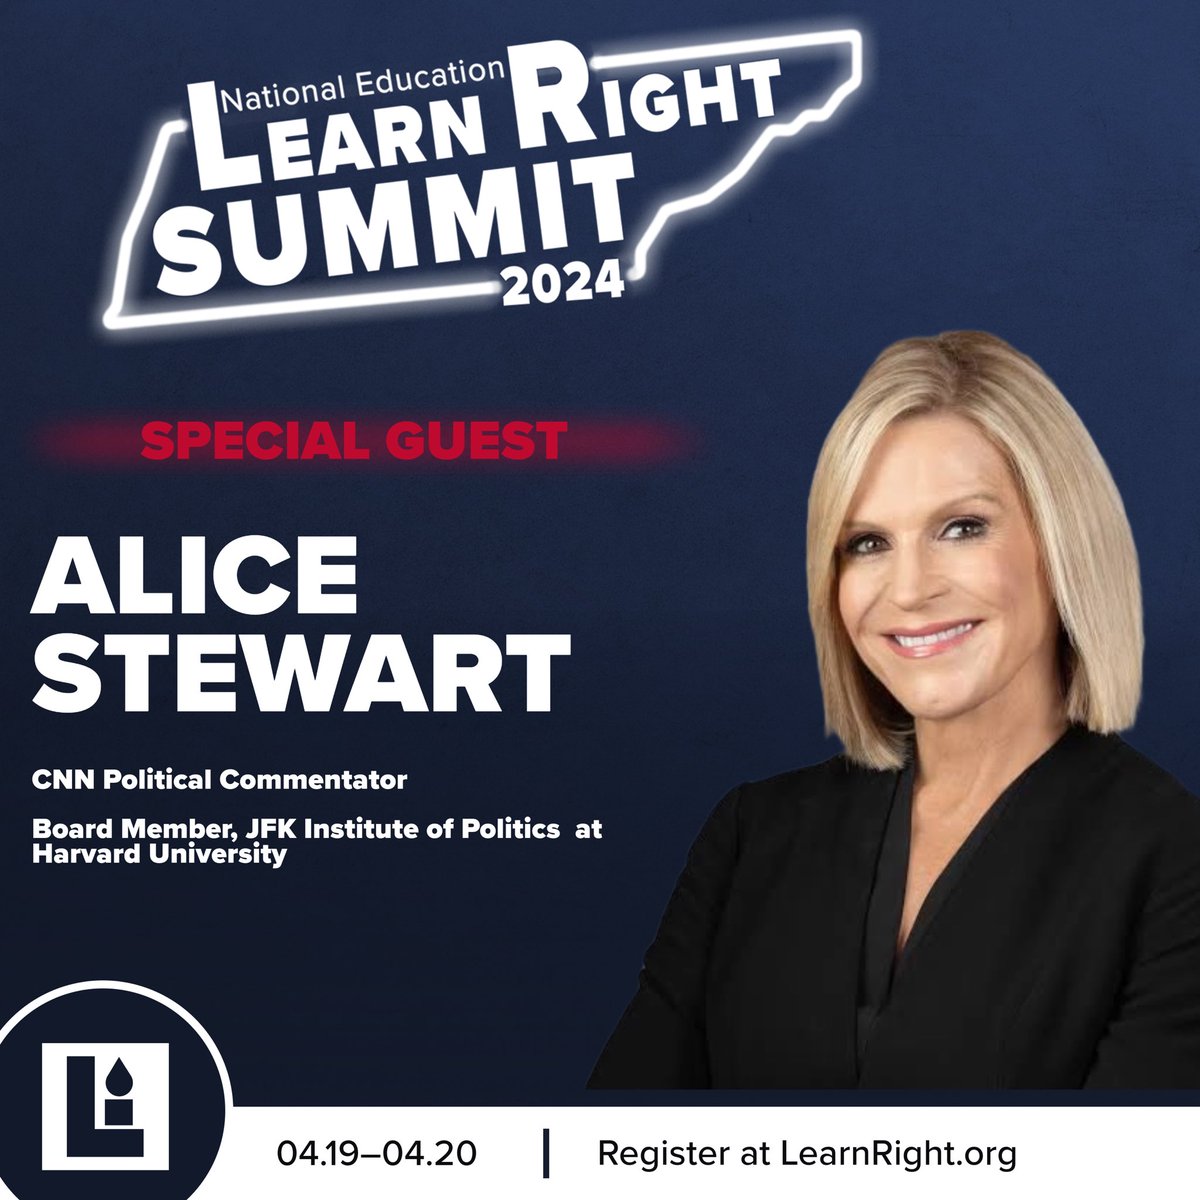 Excited to announce @AliceStewartDC 
 will be joining us at the #learnright24 summit next week in Nashville, TN!

Registration is still open! Get your spot today at 
Learnright.org

@LeadershipInst 

#learnright #learnleadwin #schoolboard #leadership #leadershipinstitute